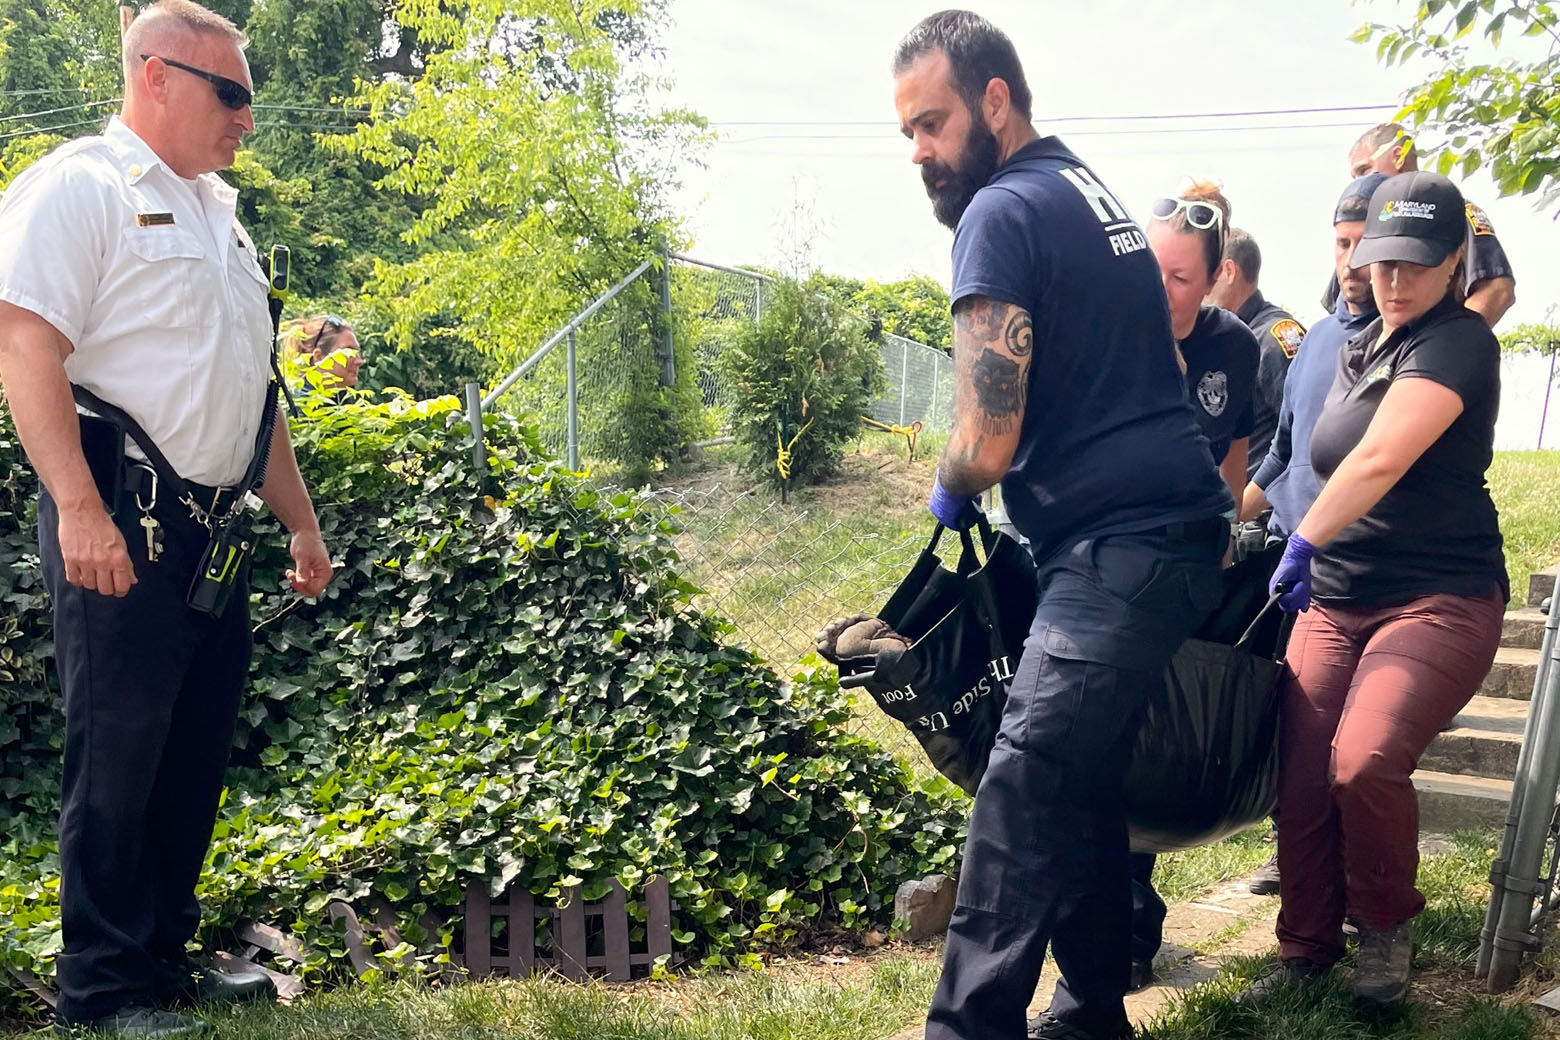 The bear was safely sedated and could soon be released into the wild. (Courtesy D.C. Fire and EMS)